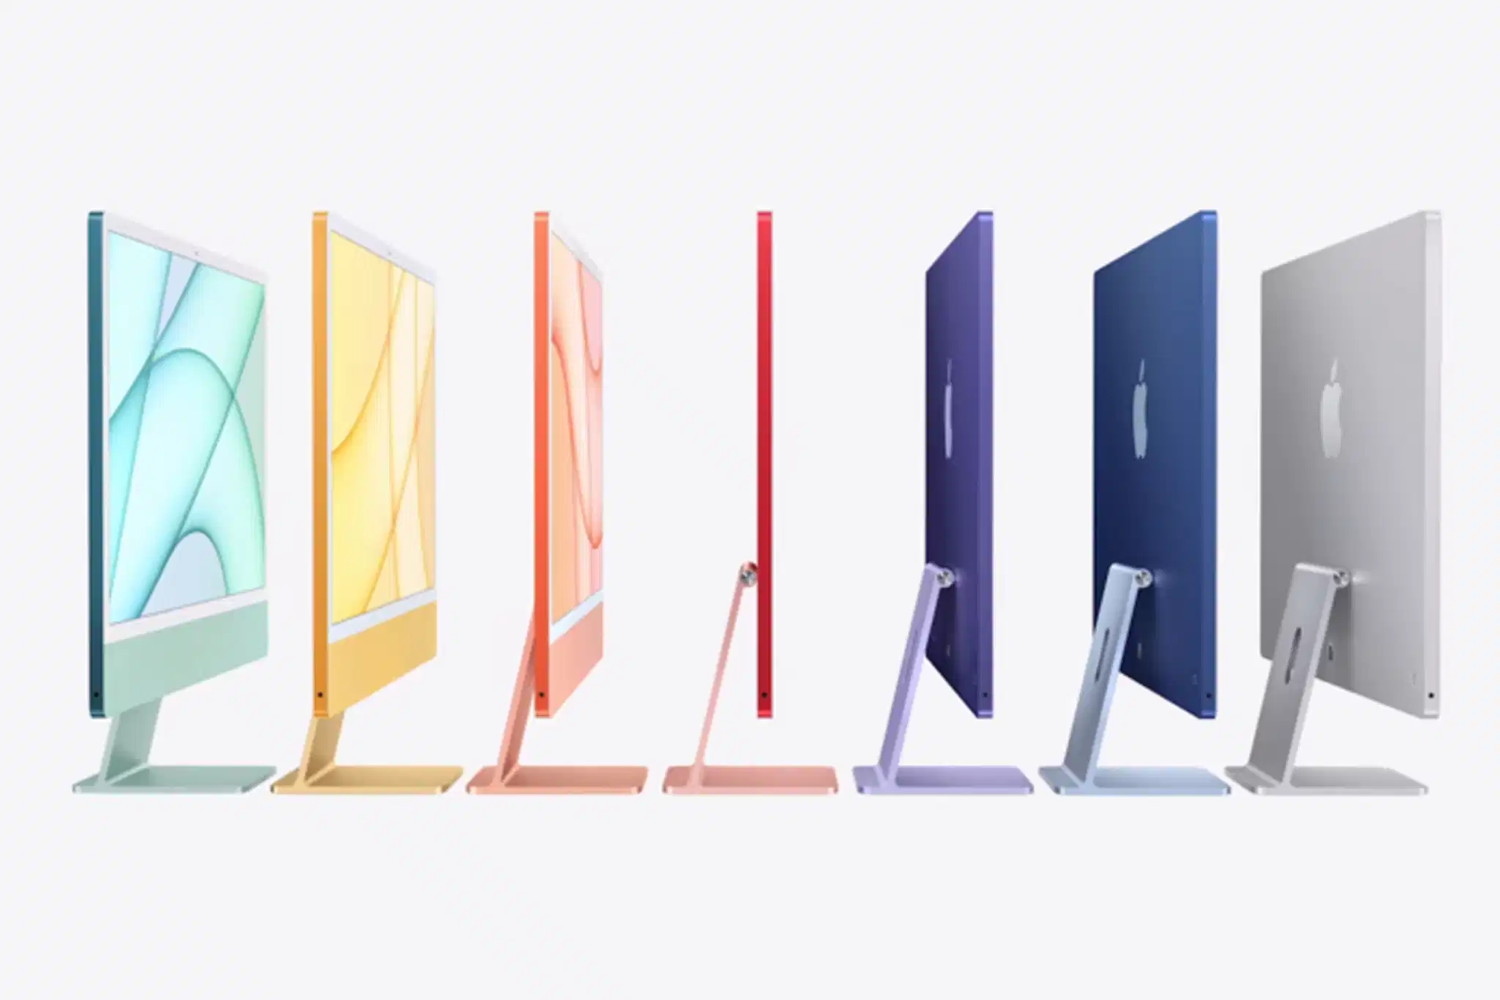 24-inch M1 iMacs in colors